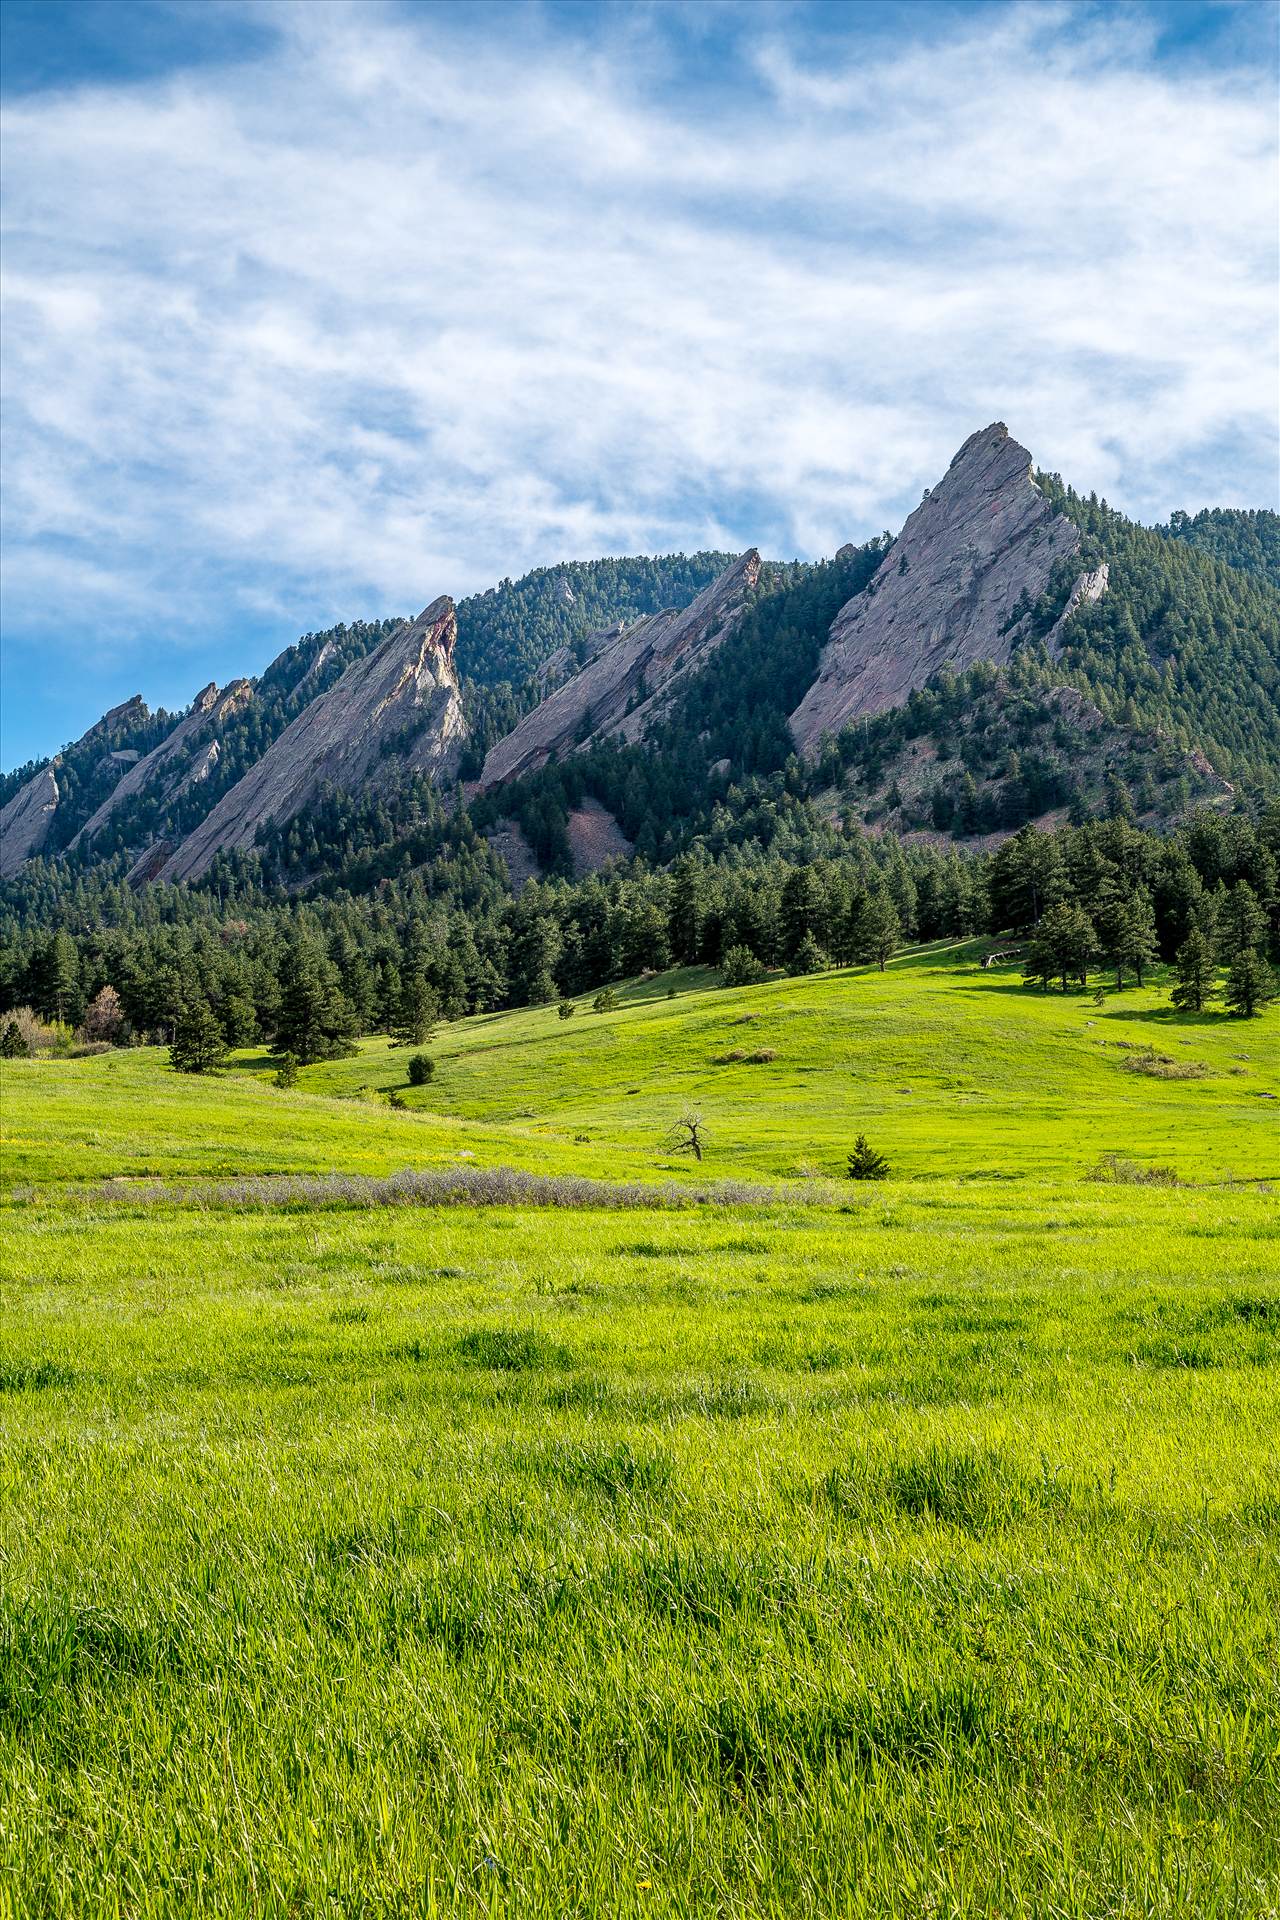 Flatirons - The Flatirons, taken near the National Atmospheric Research Laboratory in Boulder, CO. by Scott Smith Photos